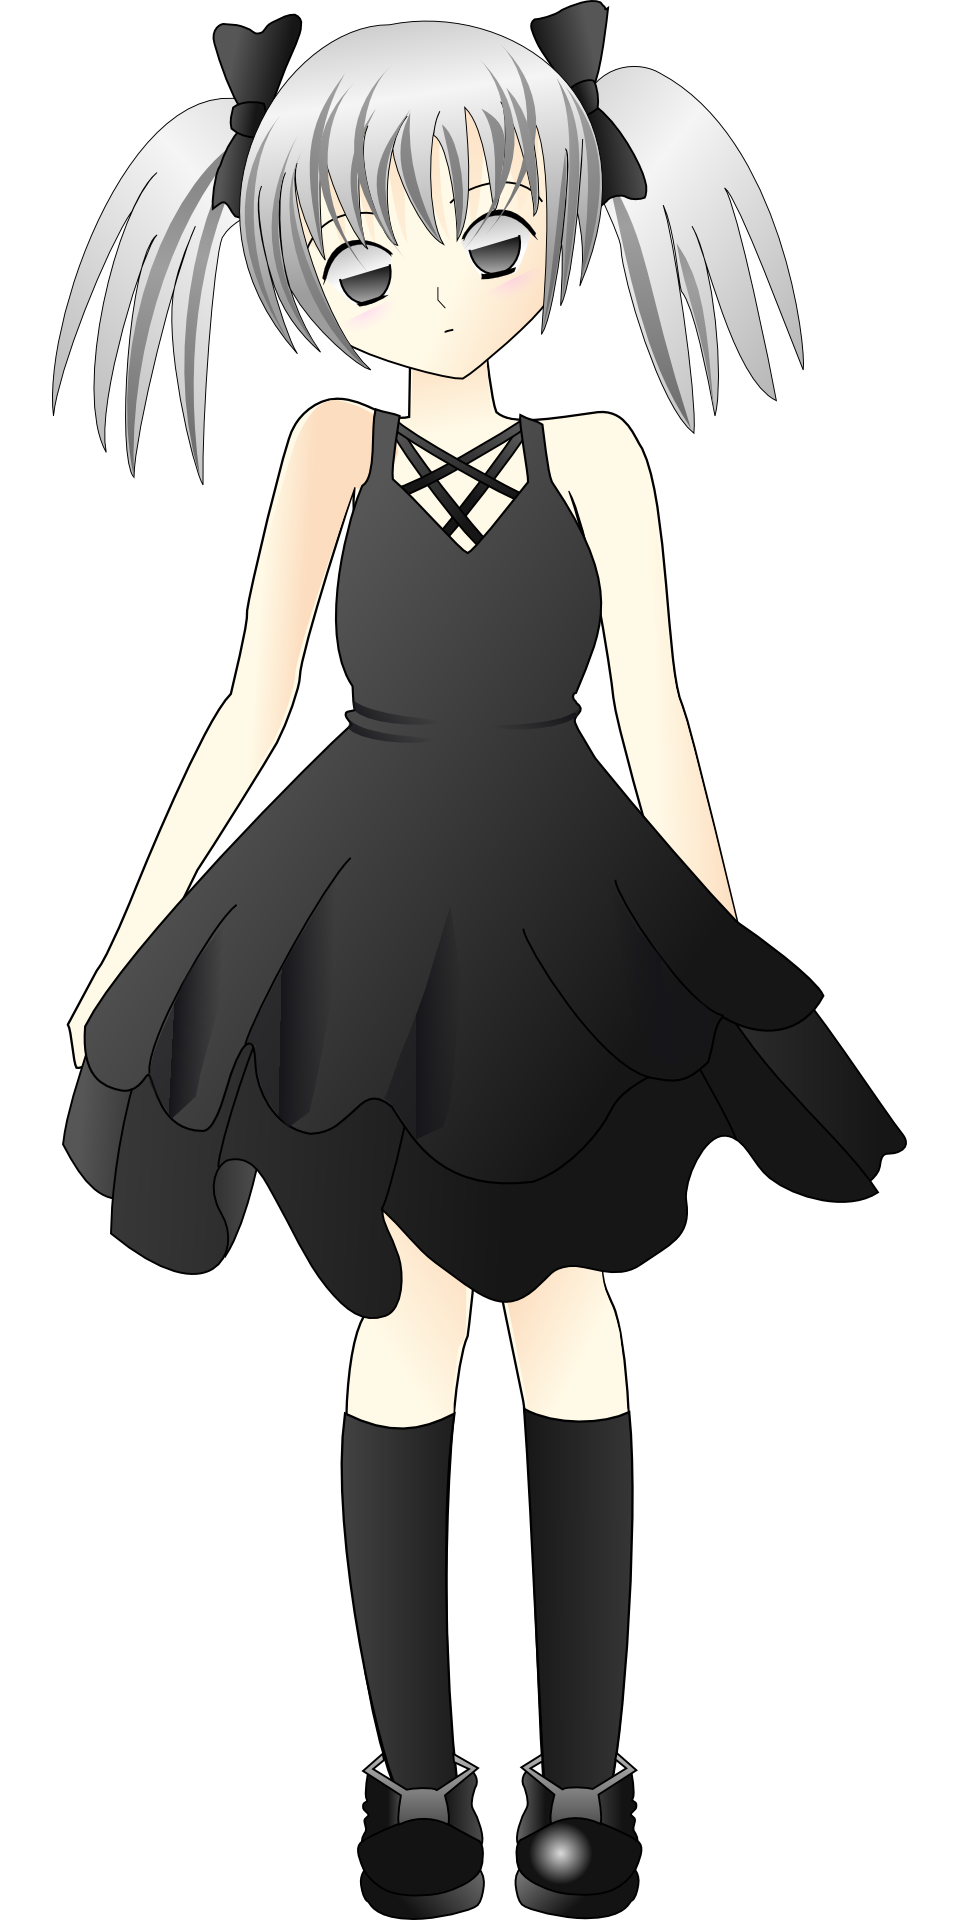 Girl with the black clothes clipart free image download